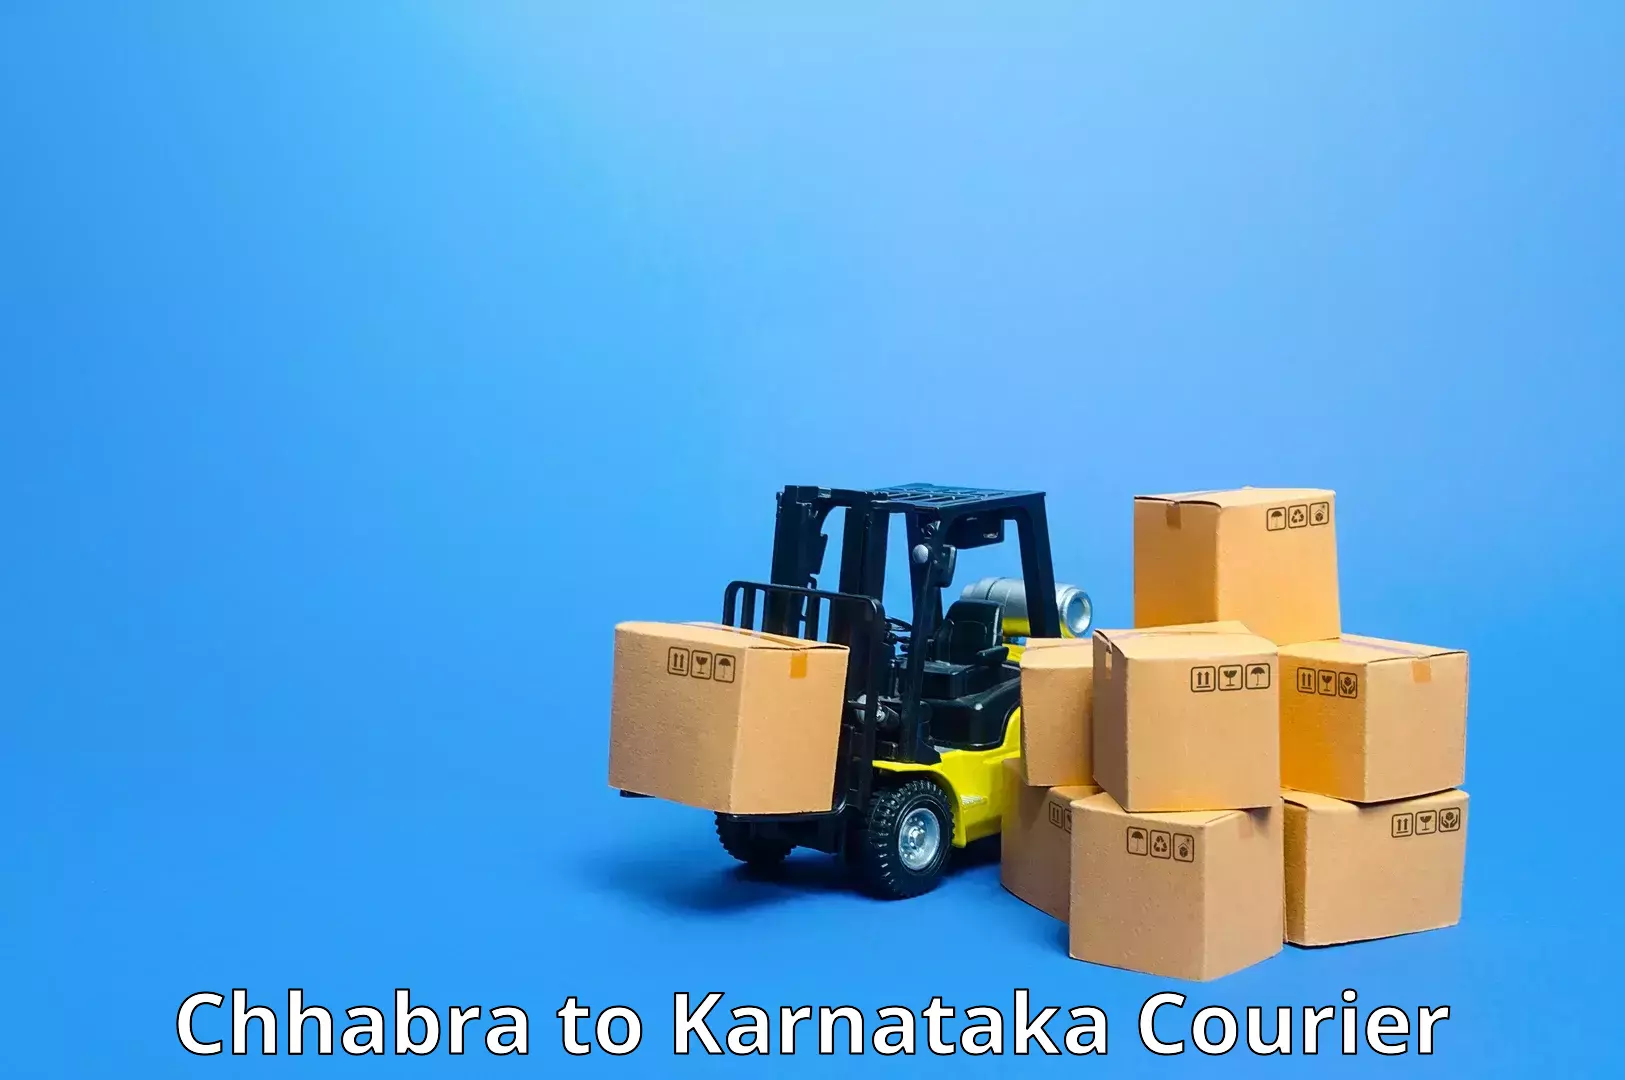 Cross-border shipping Chhabra to Chikmagalur